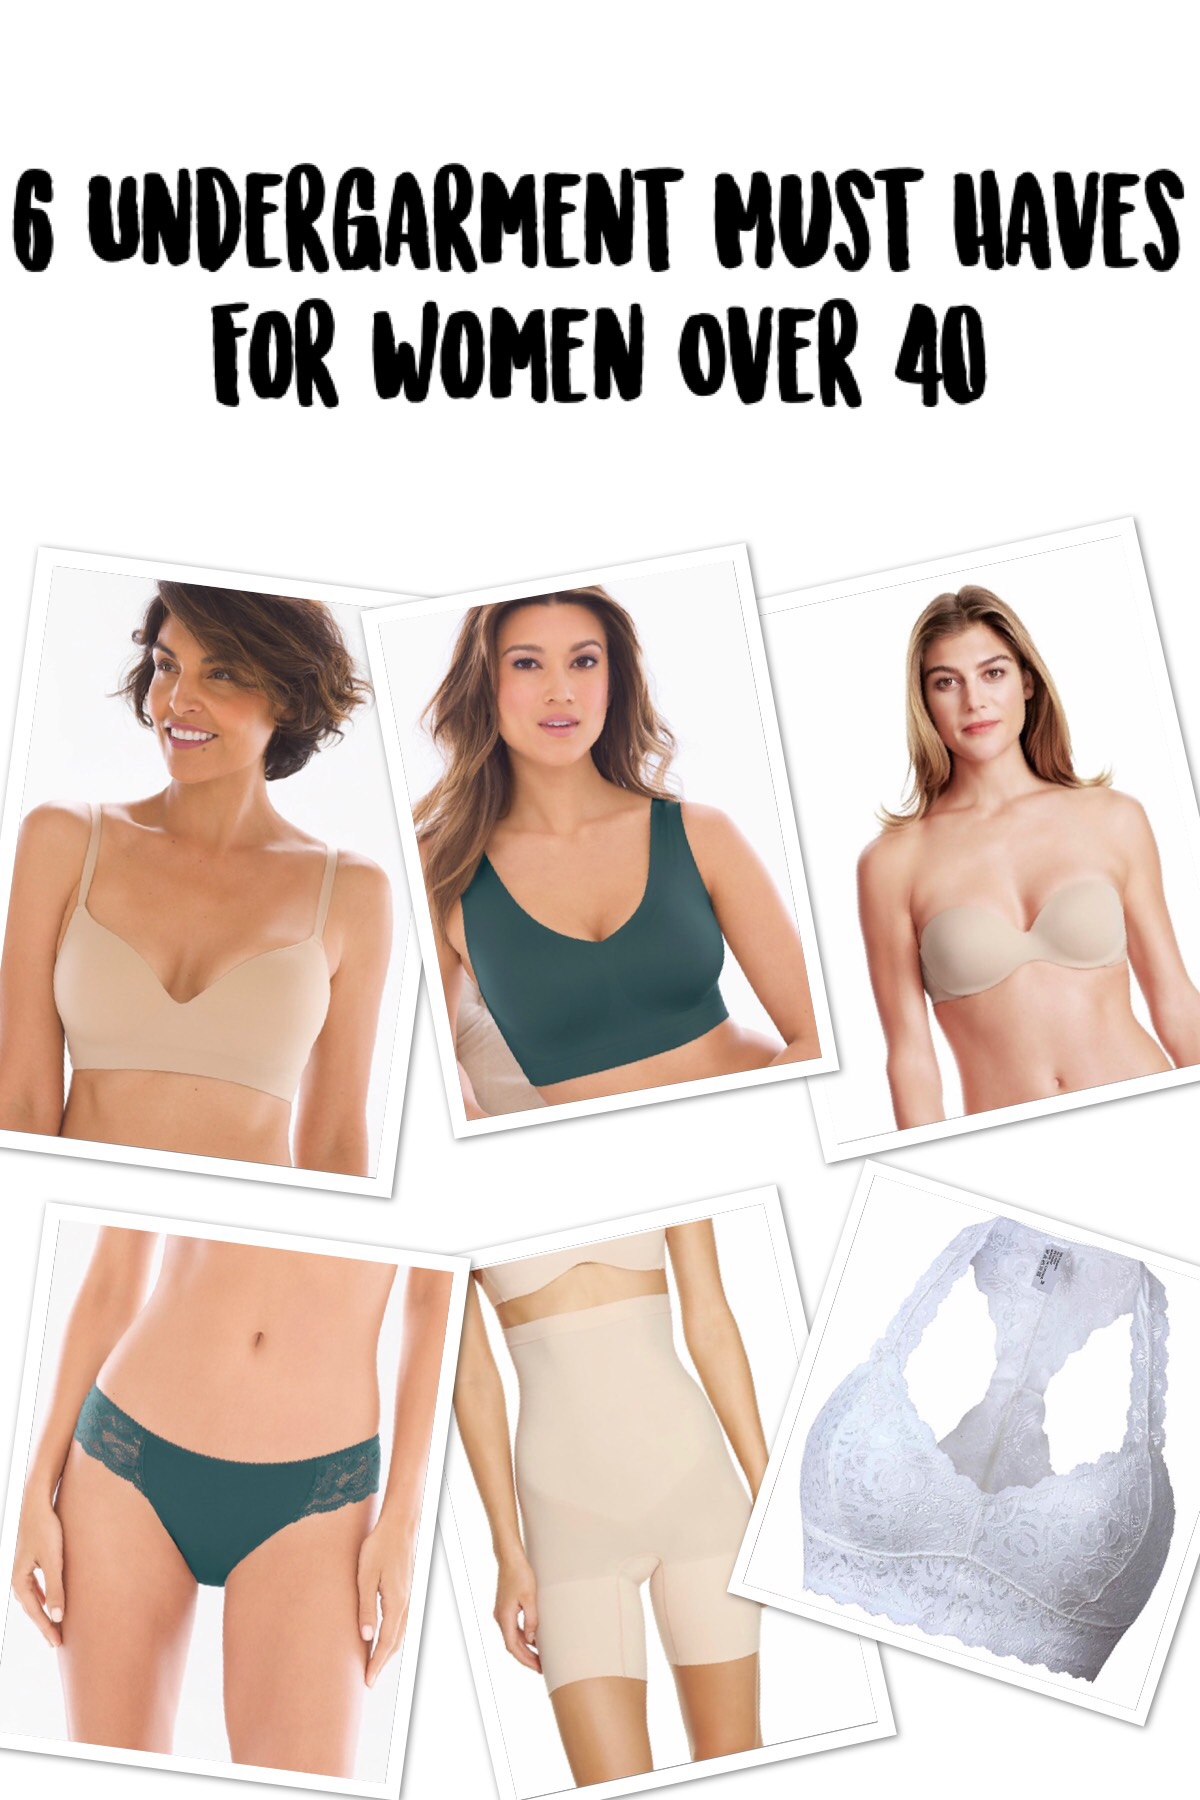 6 Undergarment Must Haves for Women Over 40 - Daily Dose of Style